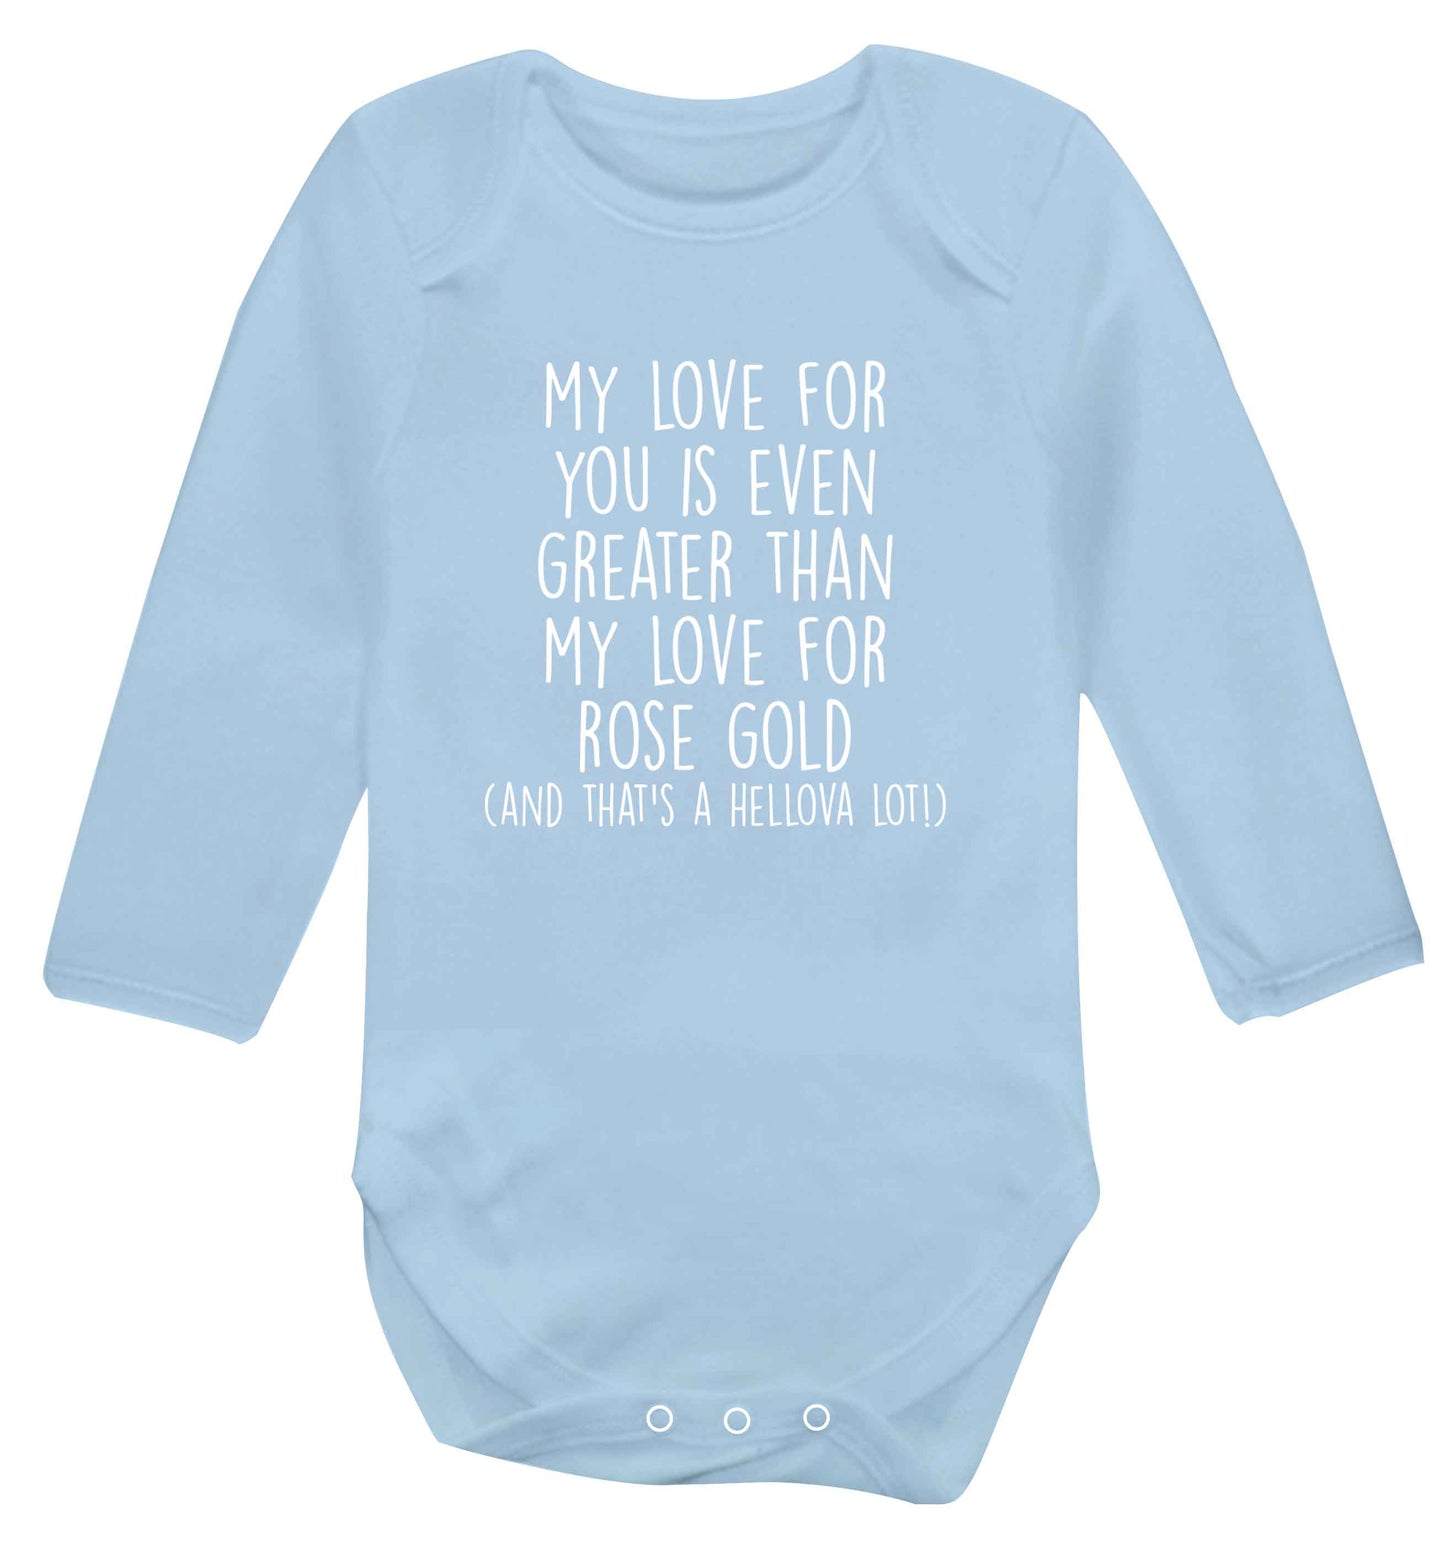 My love for you is even greater than my love for rose gold (and that's a hellova lot) baby vest long sleeved pale blue 6-12 months